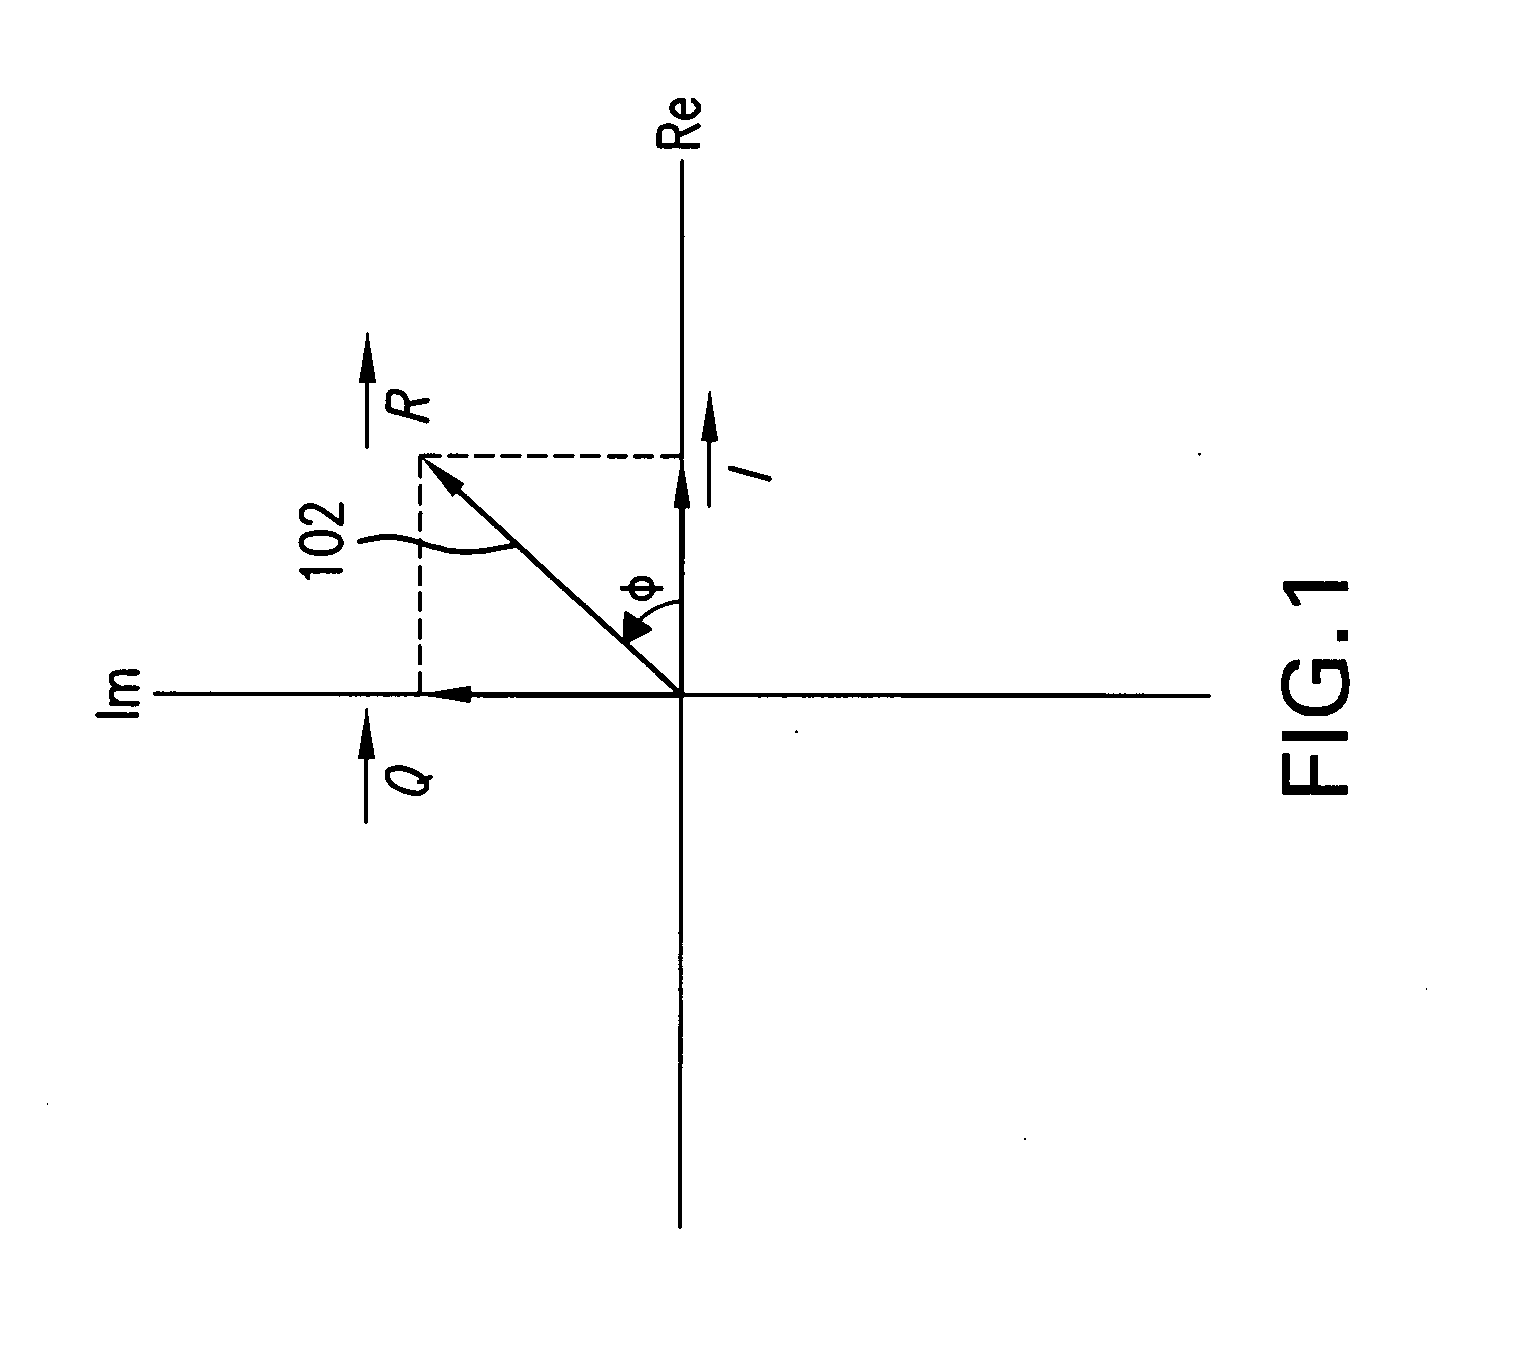 Systems and methods of RF power transmission, modulation, and amplification, including architectural embodiments of same